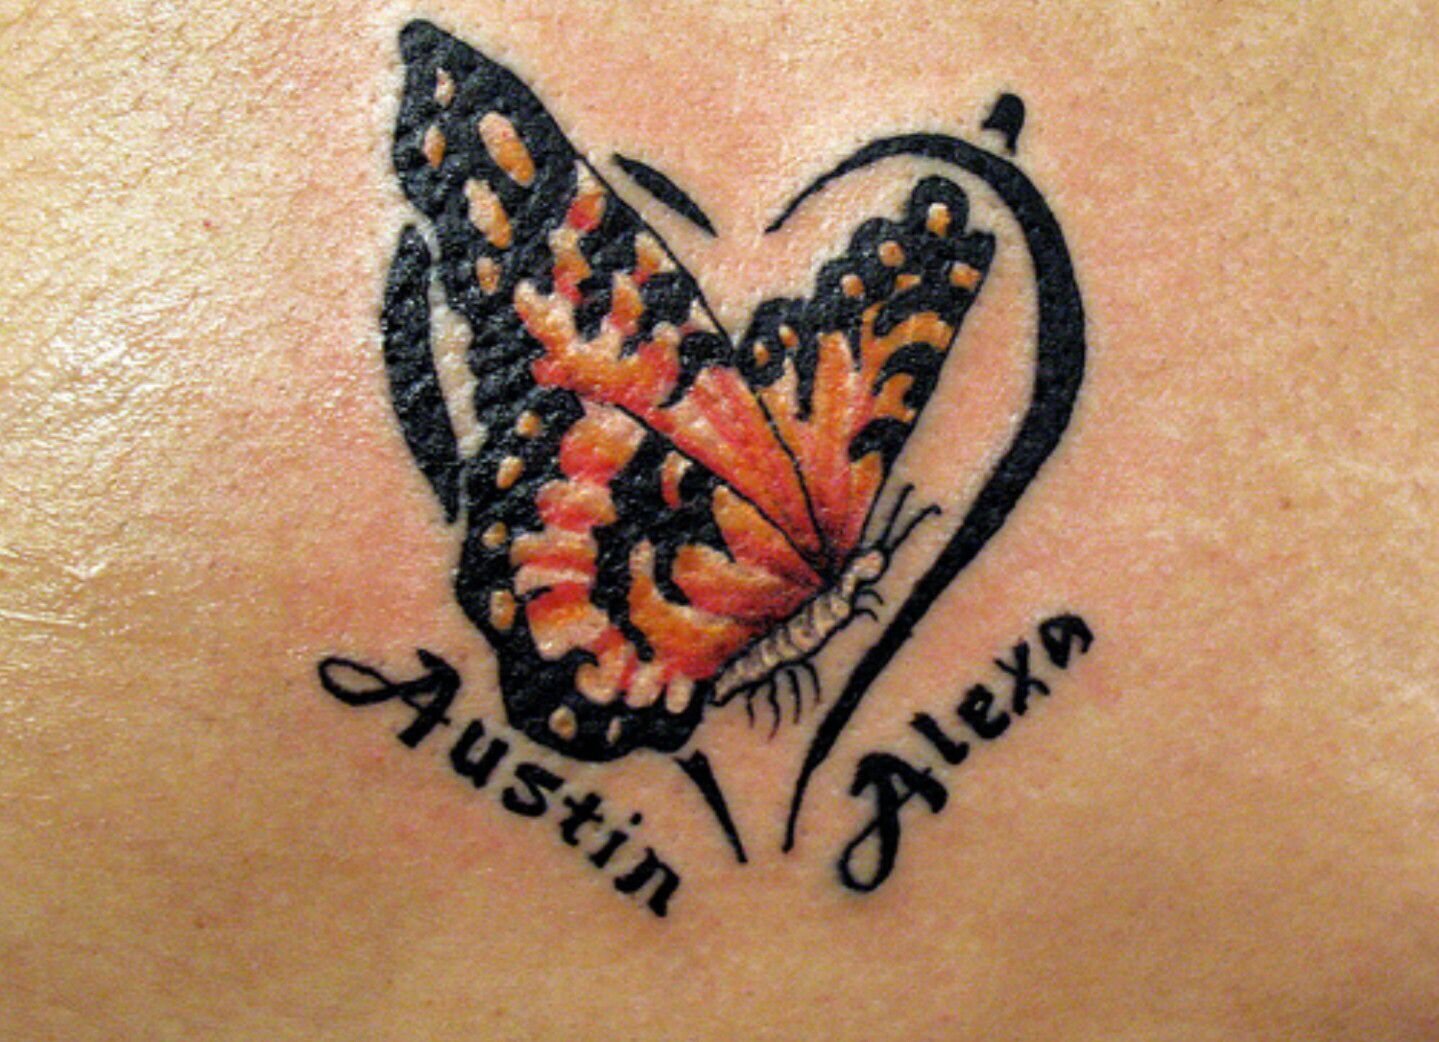 Pin Marcy Doane On Tattoos Heart Tattoos With Names Tattoos inside dimensions 1439 X 1042